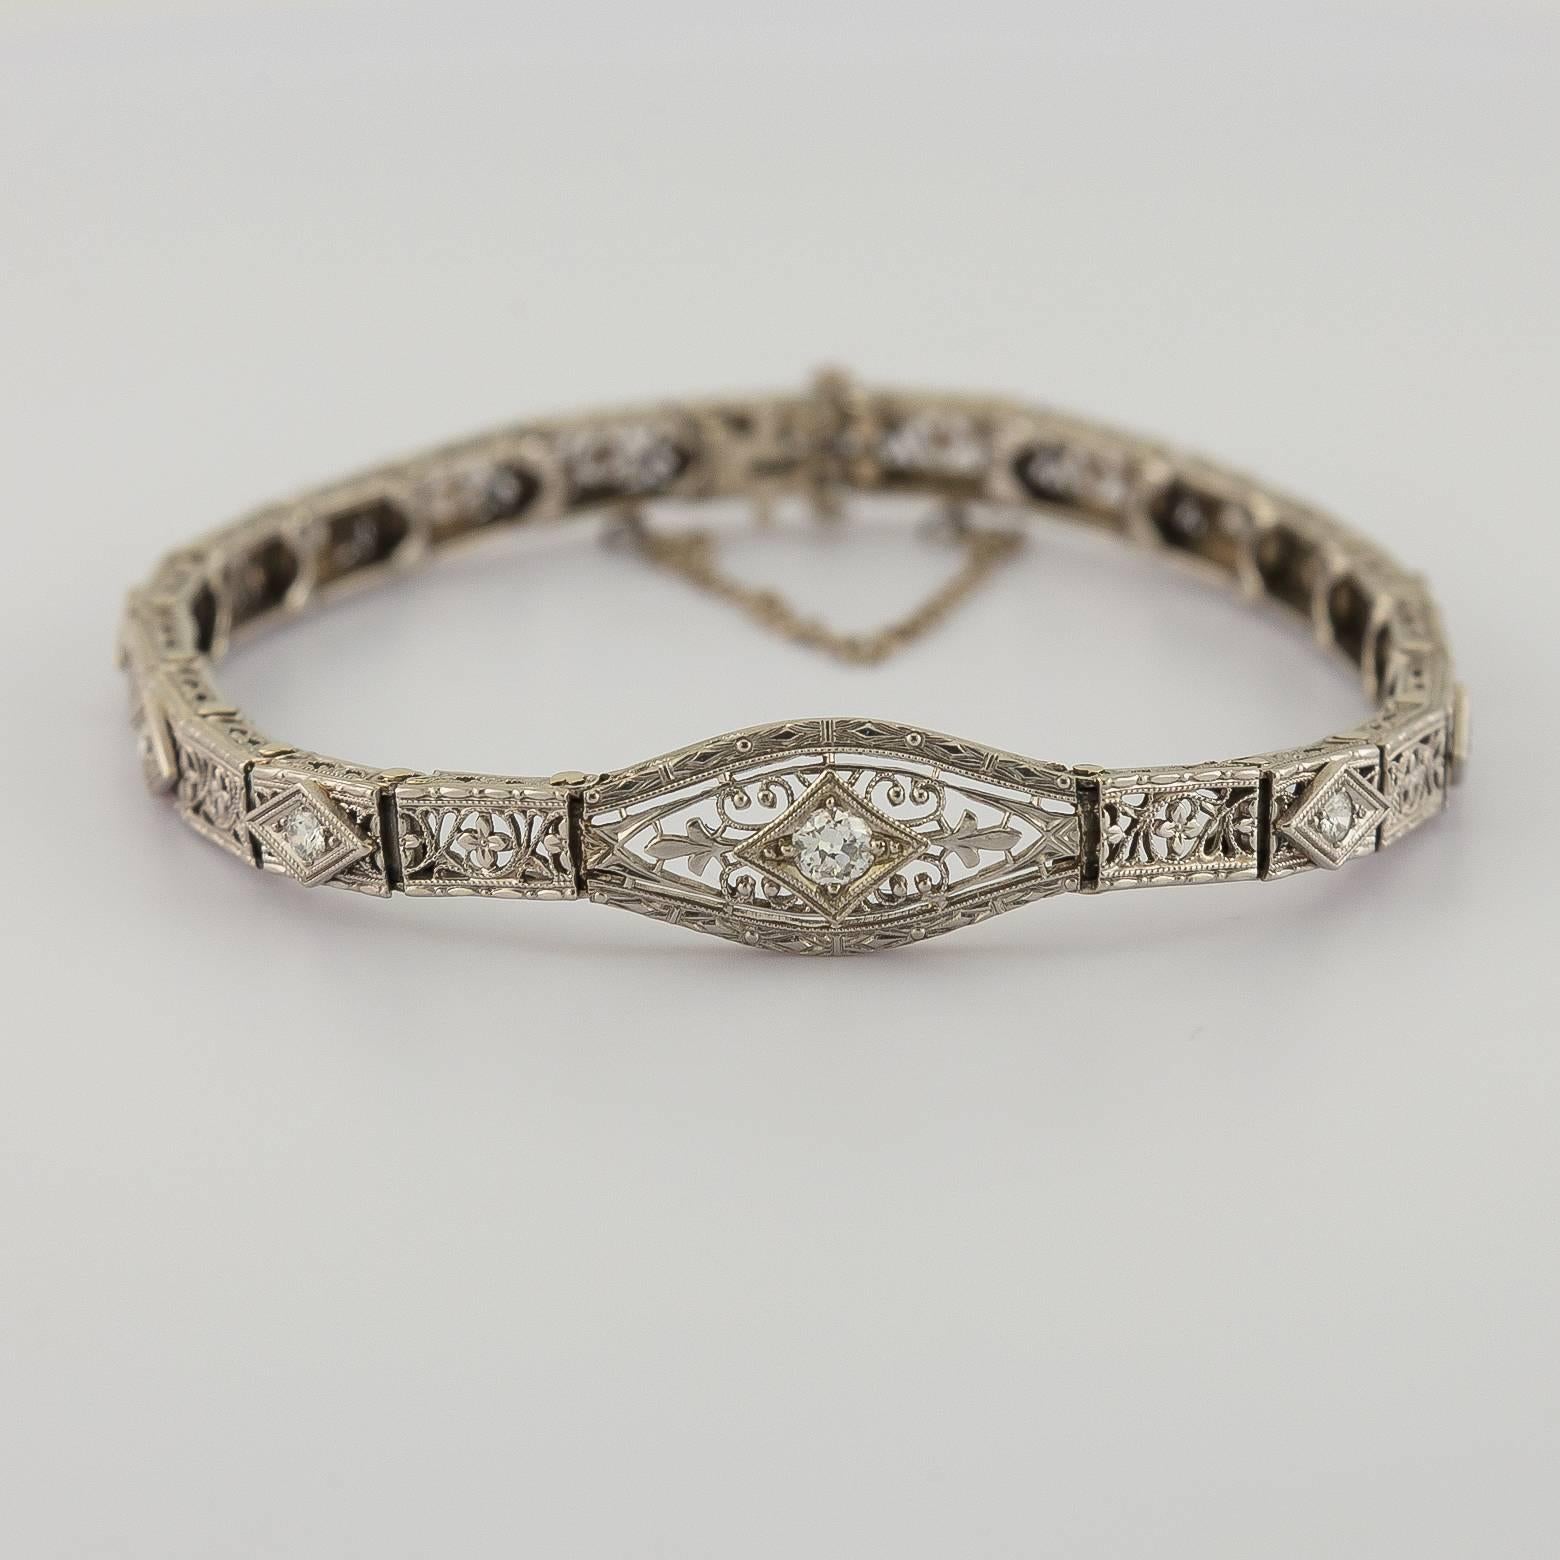 This exquisite diamond bracelet is delicate and finely engraved. Each interlocking 'link' is set with a round diamond and a larger accent diamond in the center.